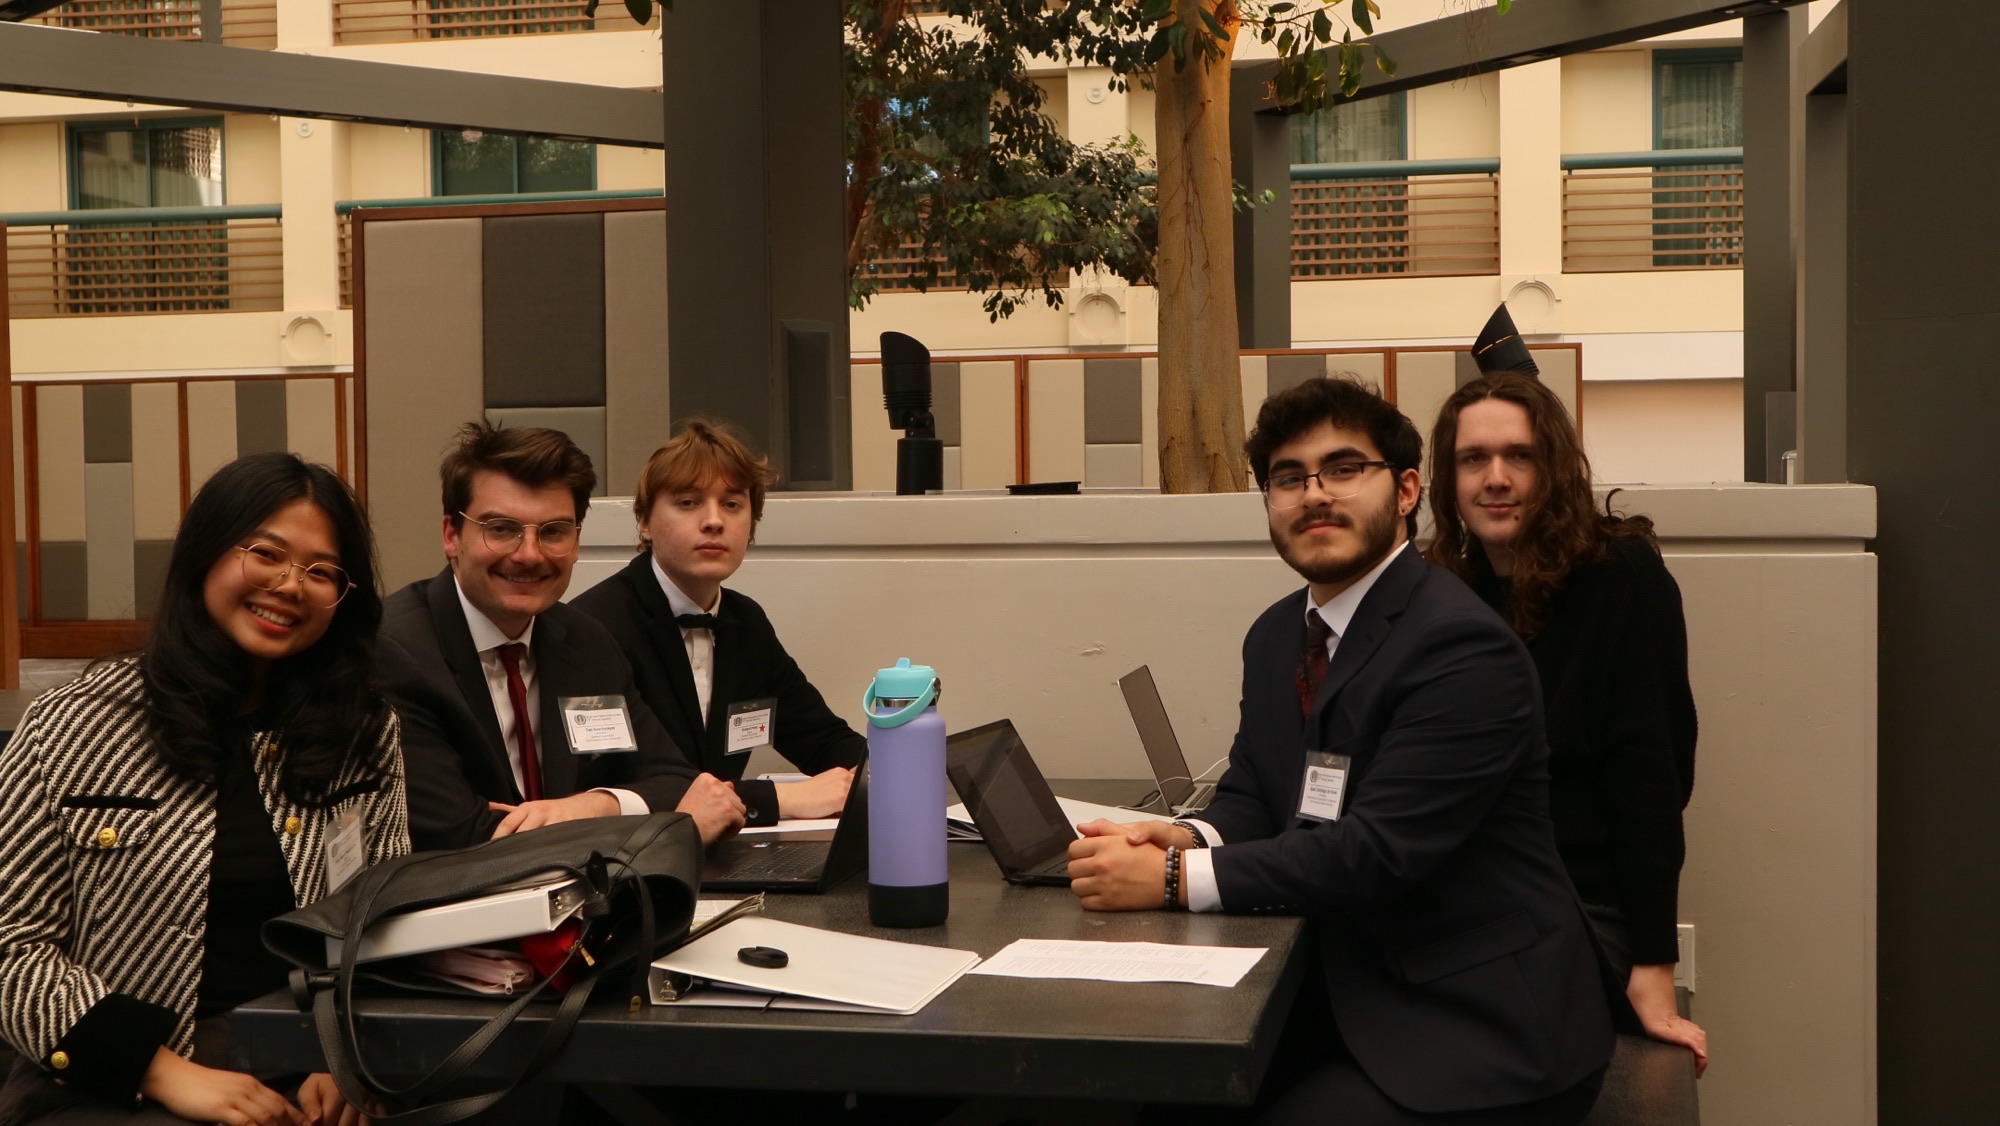 Five students sit at an outdoor table at the Model UN venue. They have laptops, water bottles, and papers ready. They are wearing suits. They face the camera and smile.